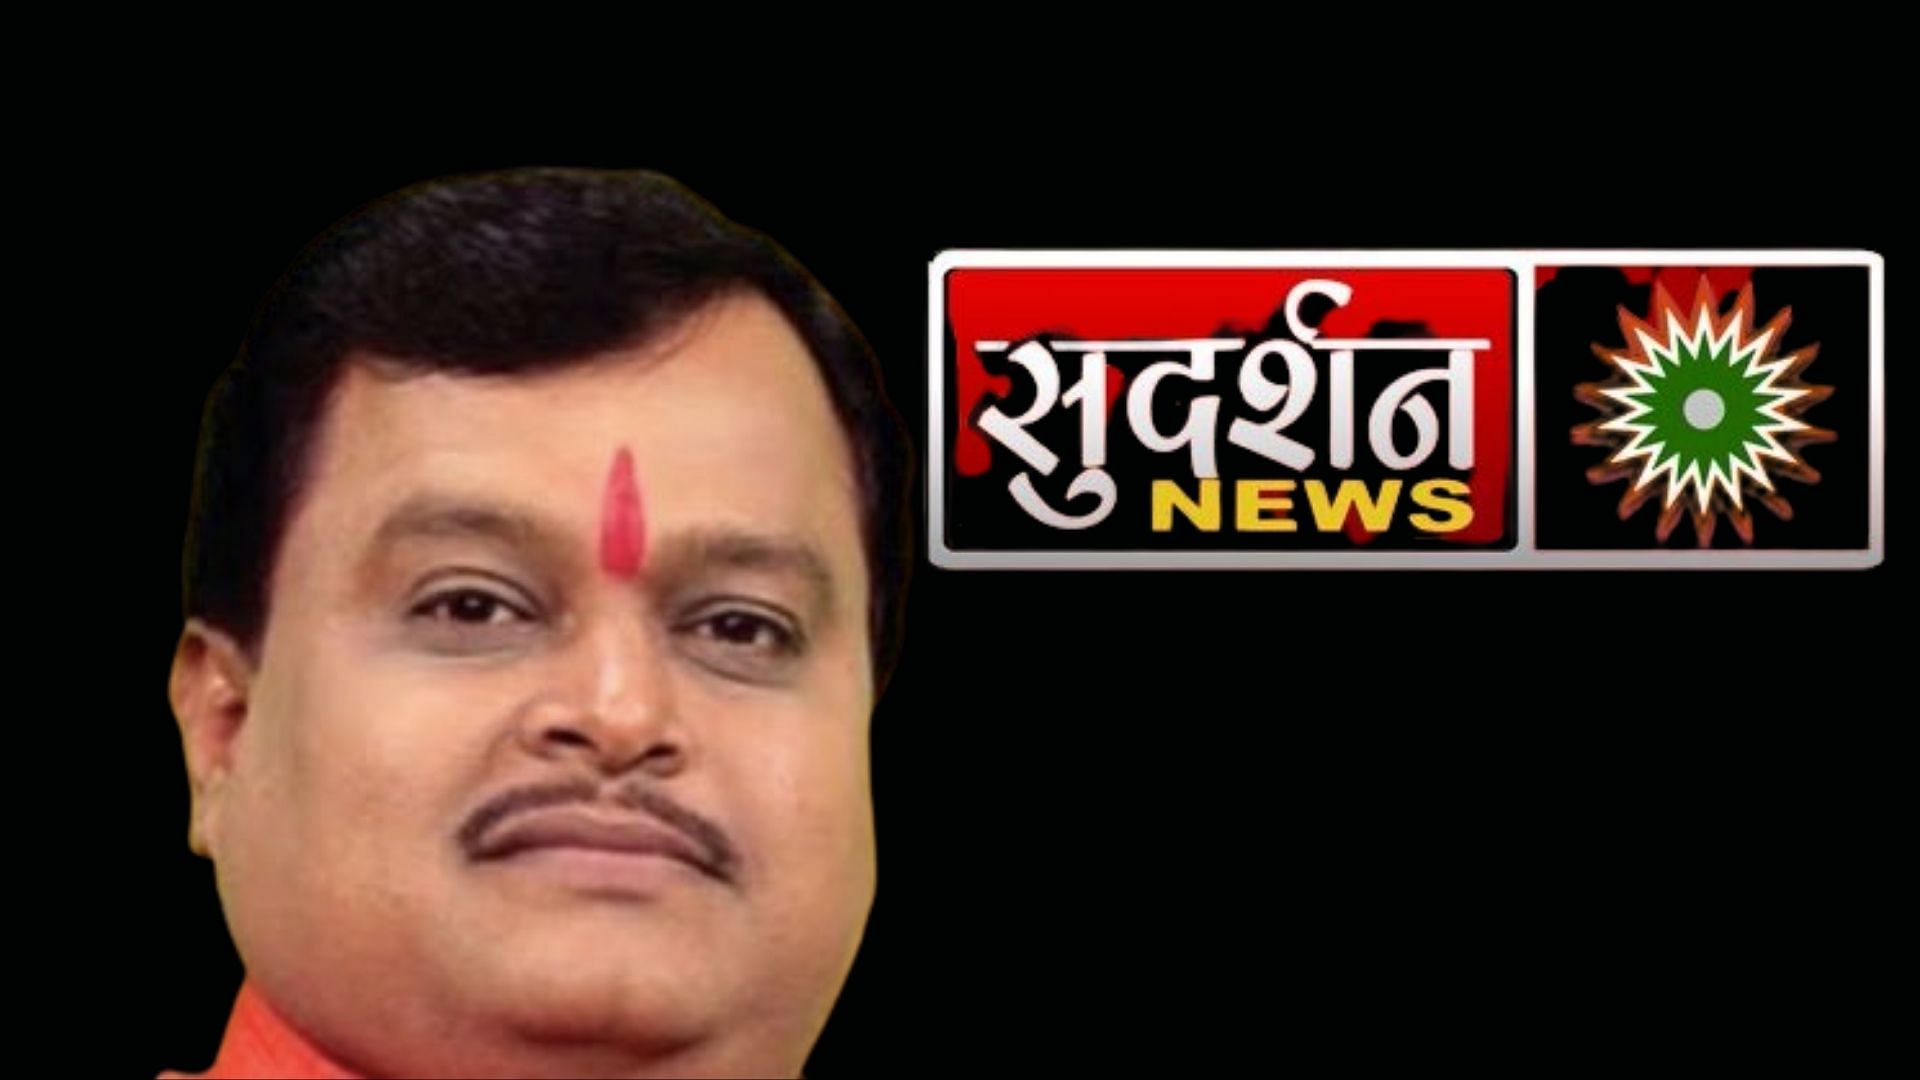 The show, ‘Bindas Bol’, was scheduled to be broadcast at 8 pm on Friday.